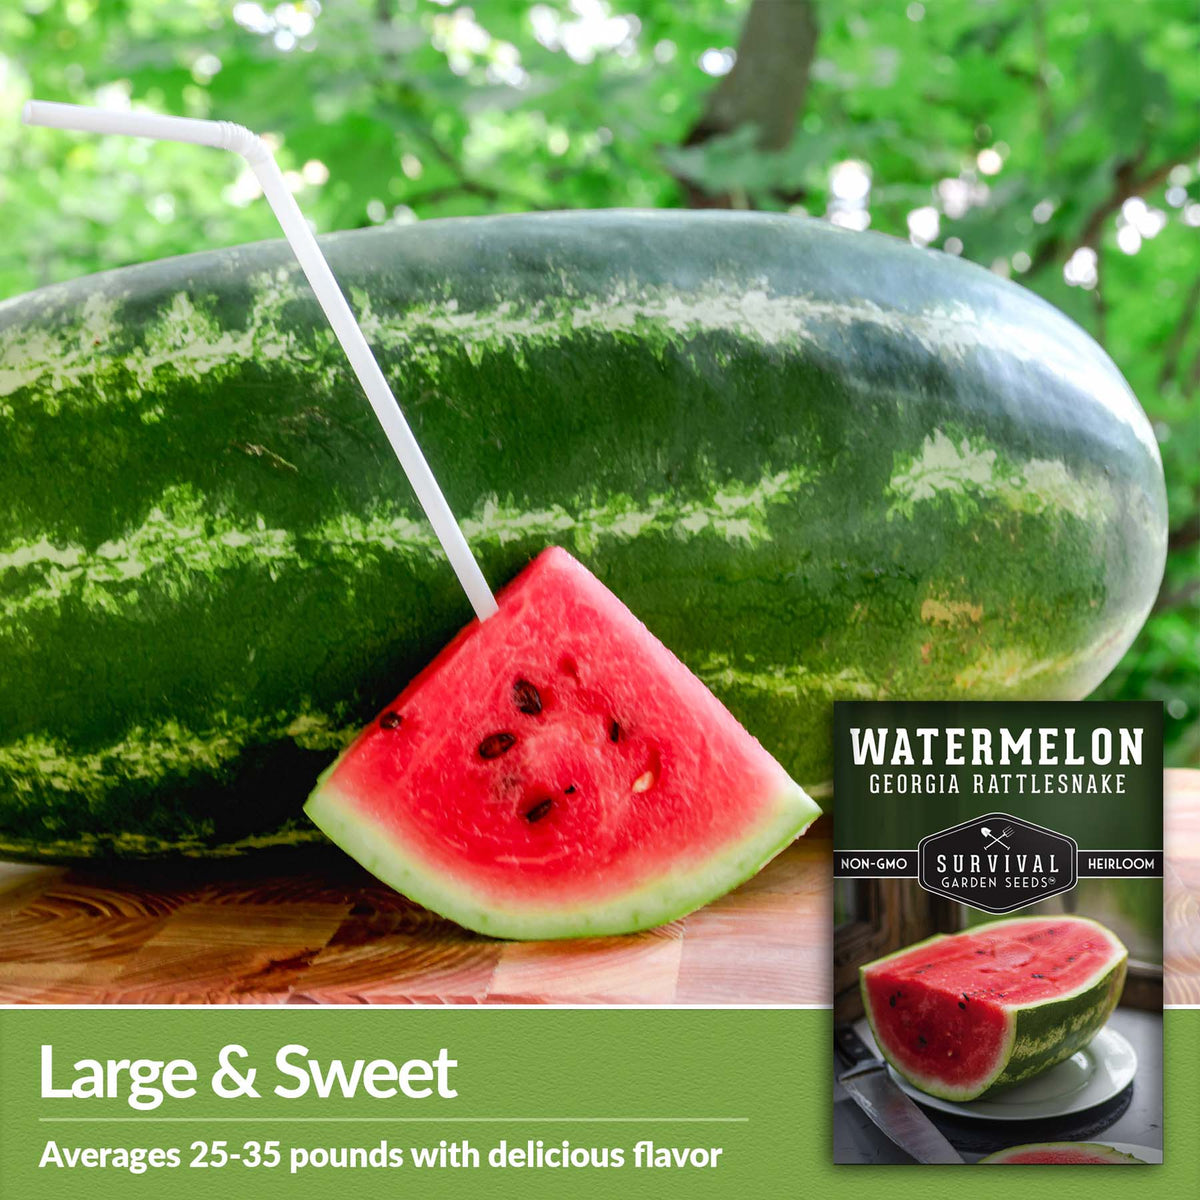 Georgia Rattlesnake Watermelons are large and sweet